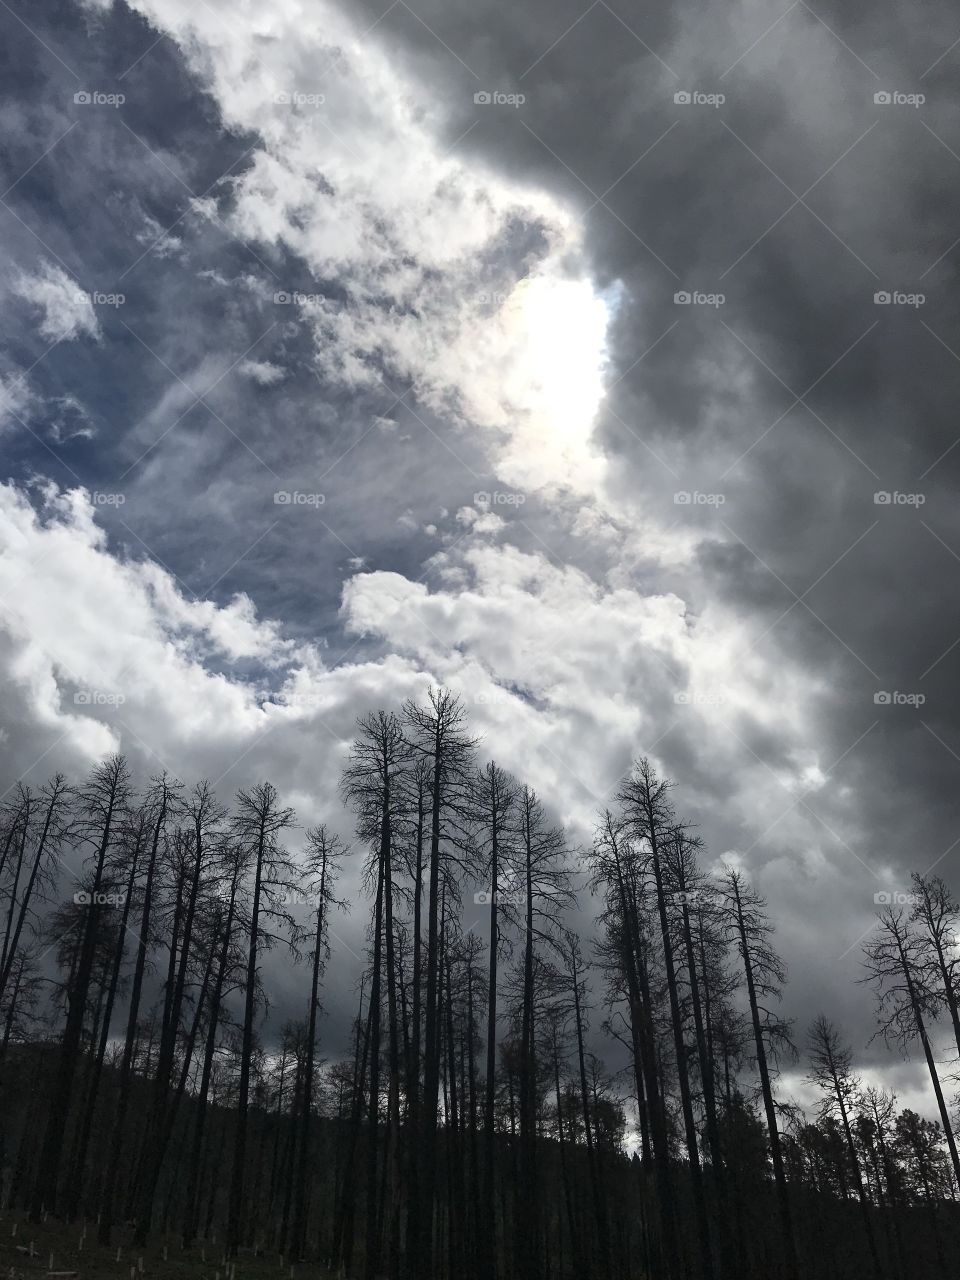 Bare trees and dramatic cloudy sky